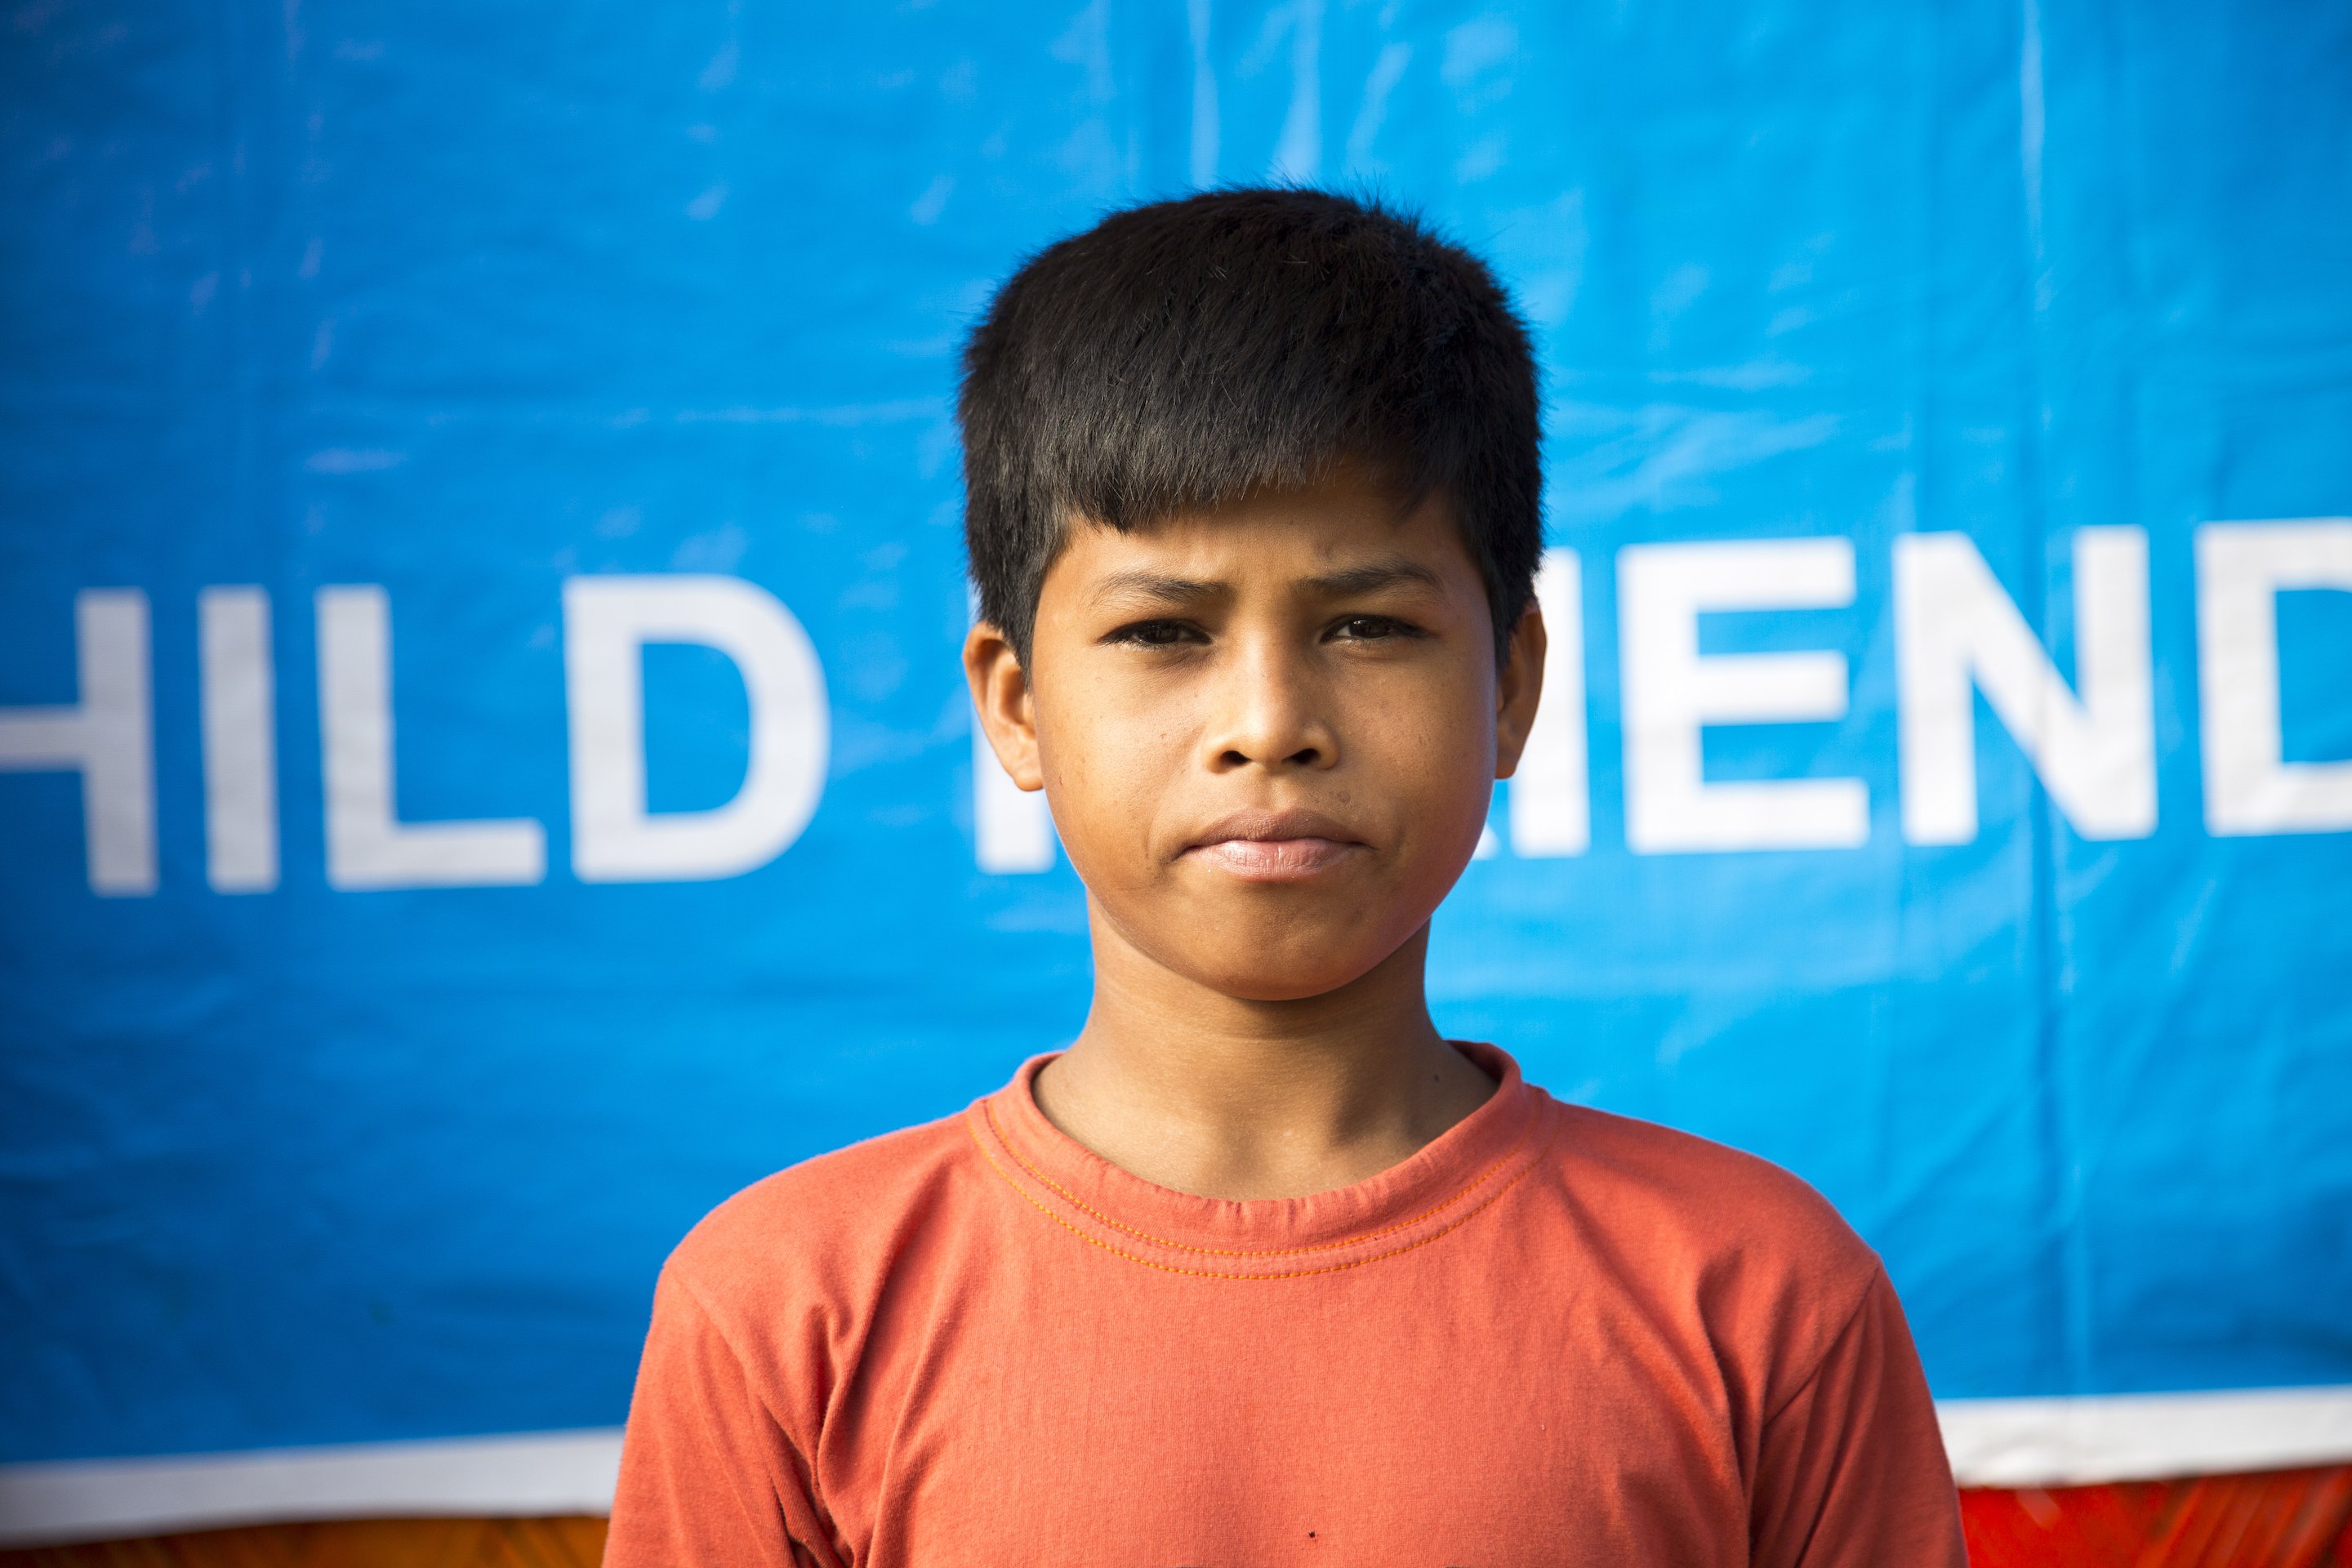 12-year-old boy from the Rohingya community in Bangladesh